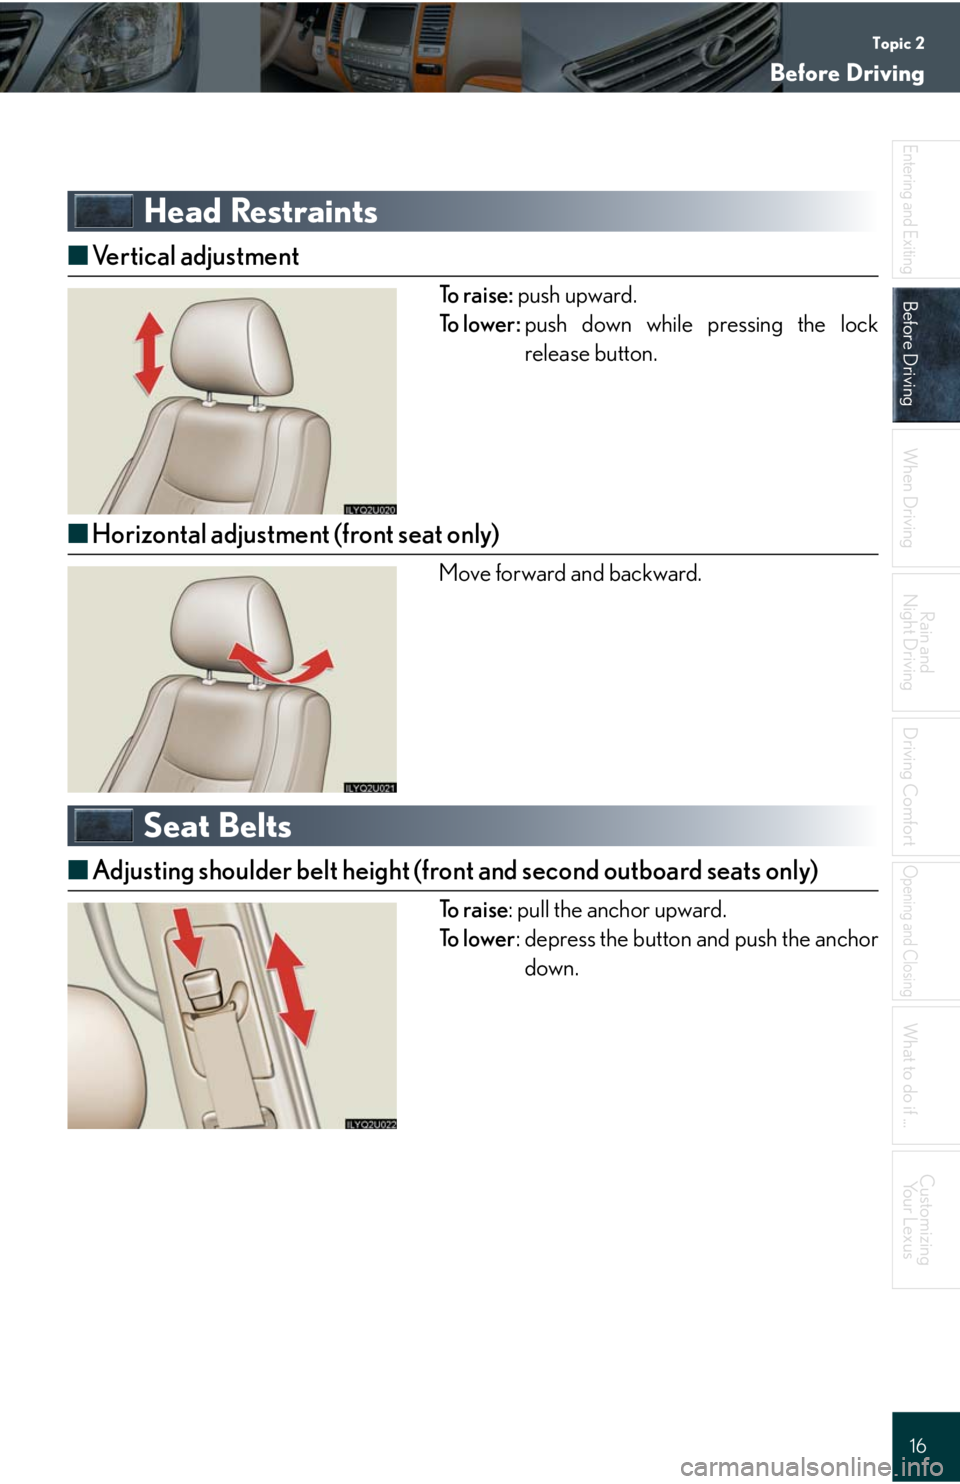 Lexus GX470 2008  Refueling / LEXUS 2008 GX470 QUICK GUIDE  (OM60D81U) User Guide Topic 2
Before Driving
16
Entering and Exiting
Before Driving
When Driving
Rain and 
Night Driving
Driving Comfort
Opening and Closing
What to do if ...
Customizing
Yo u r  L e x u s
Head Restraints
�